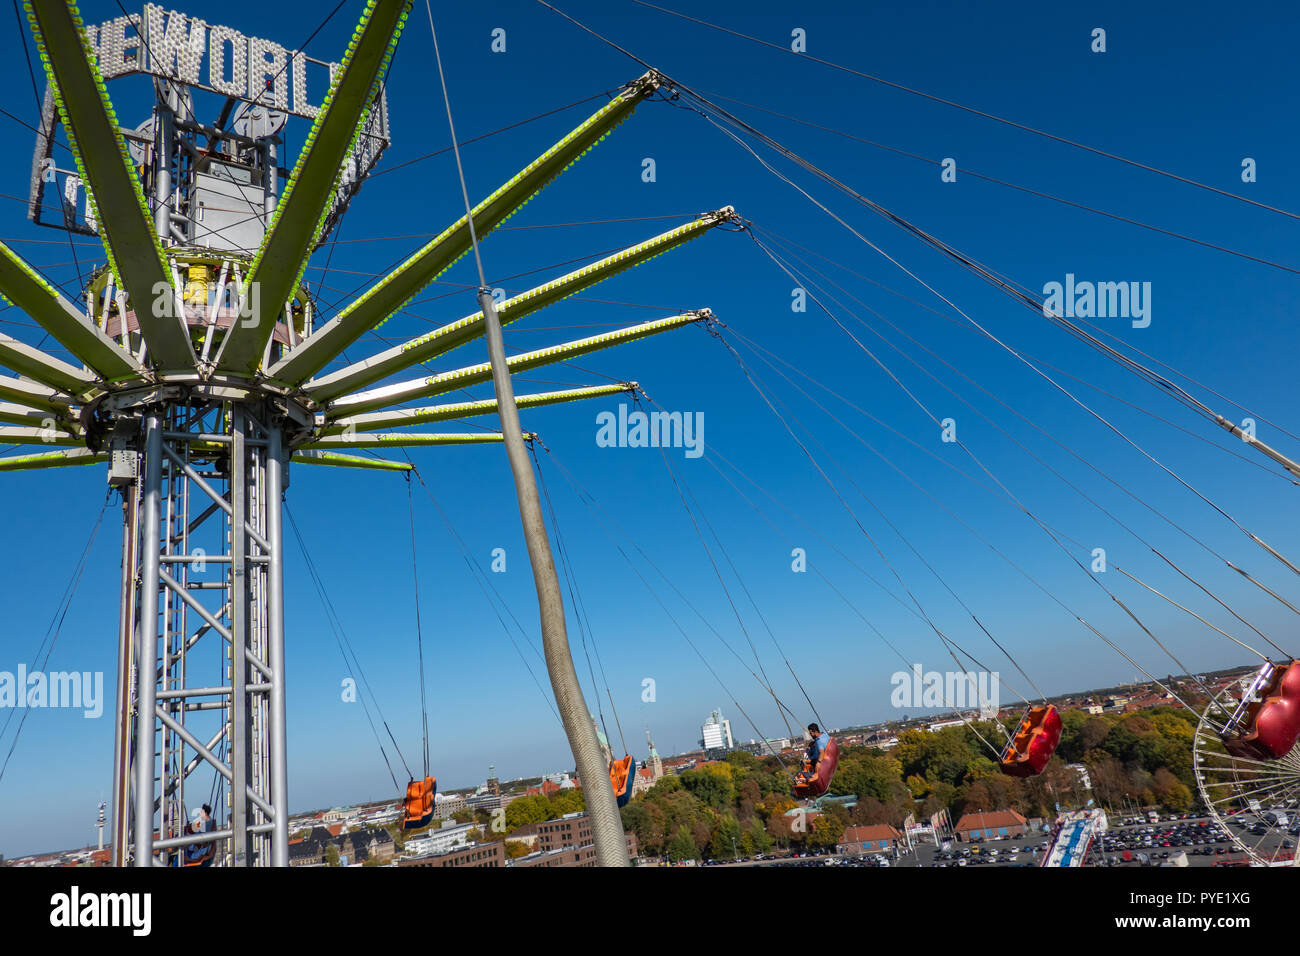 Honnover, Lower Saxony, Germany, October 13., 2018: Recording from the moving and flying gondola of a large chain carousel with parts of the carousel  Stock Photo